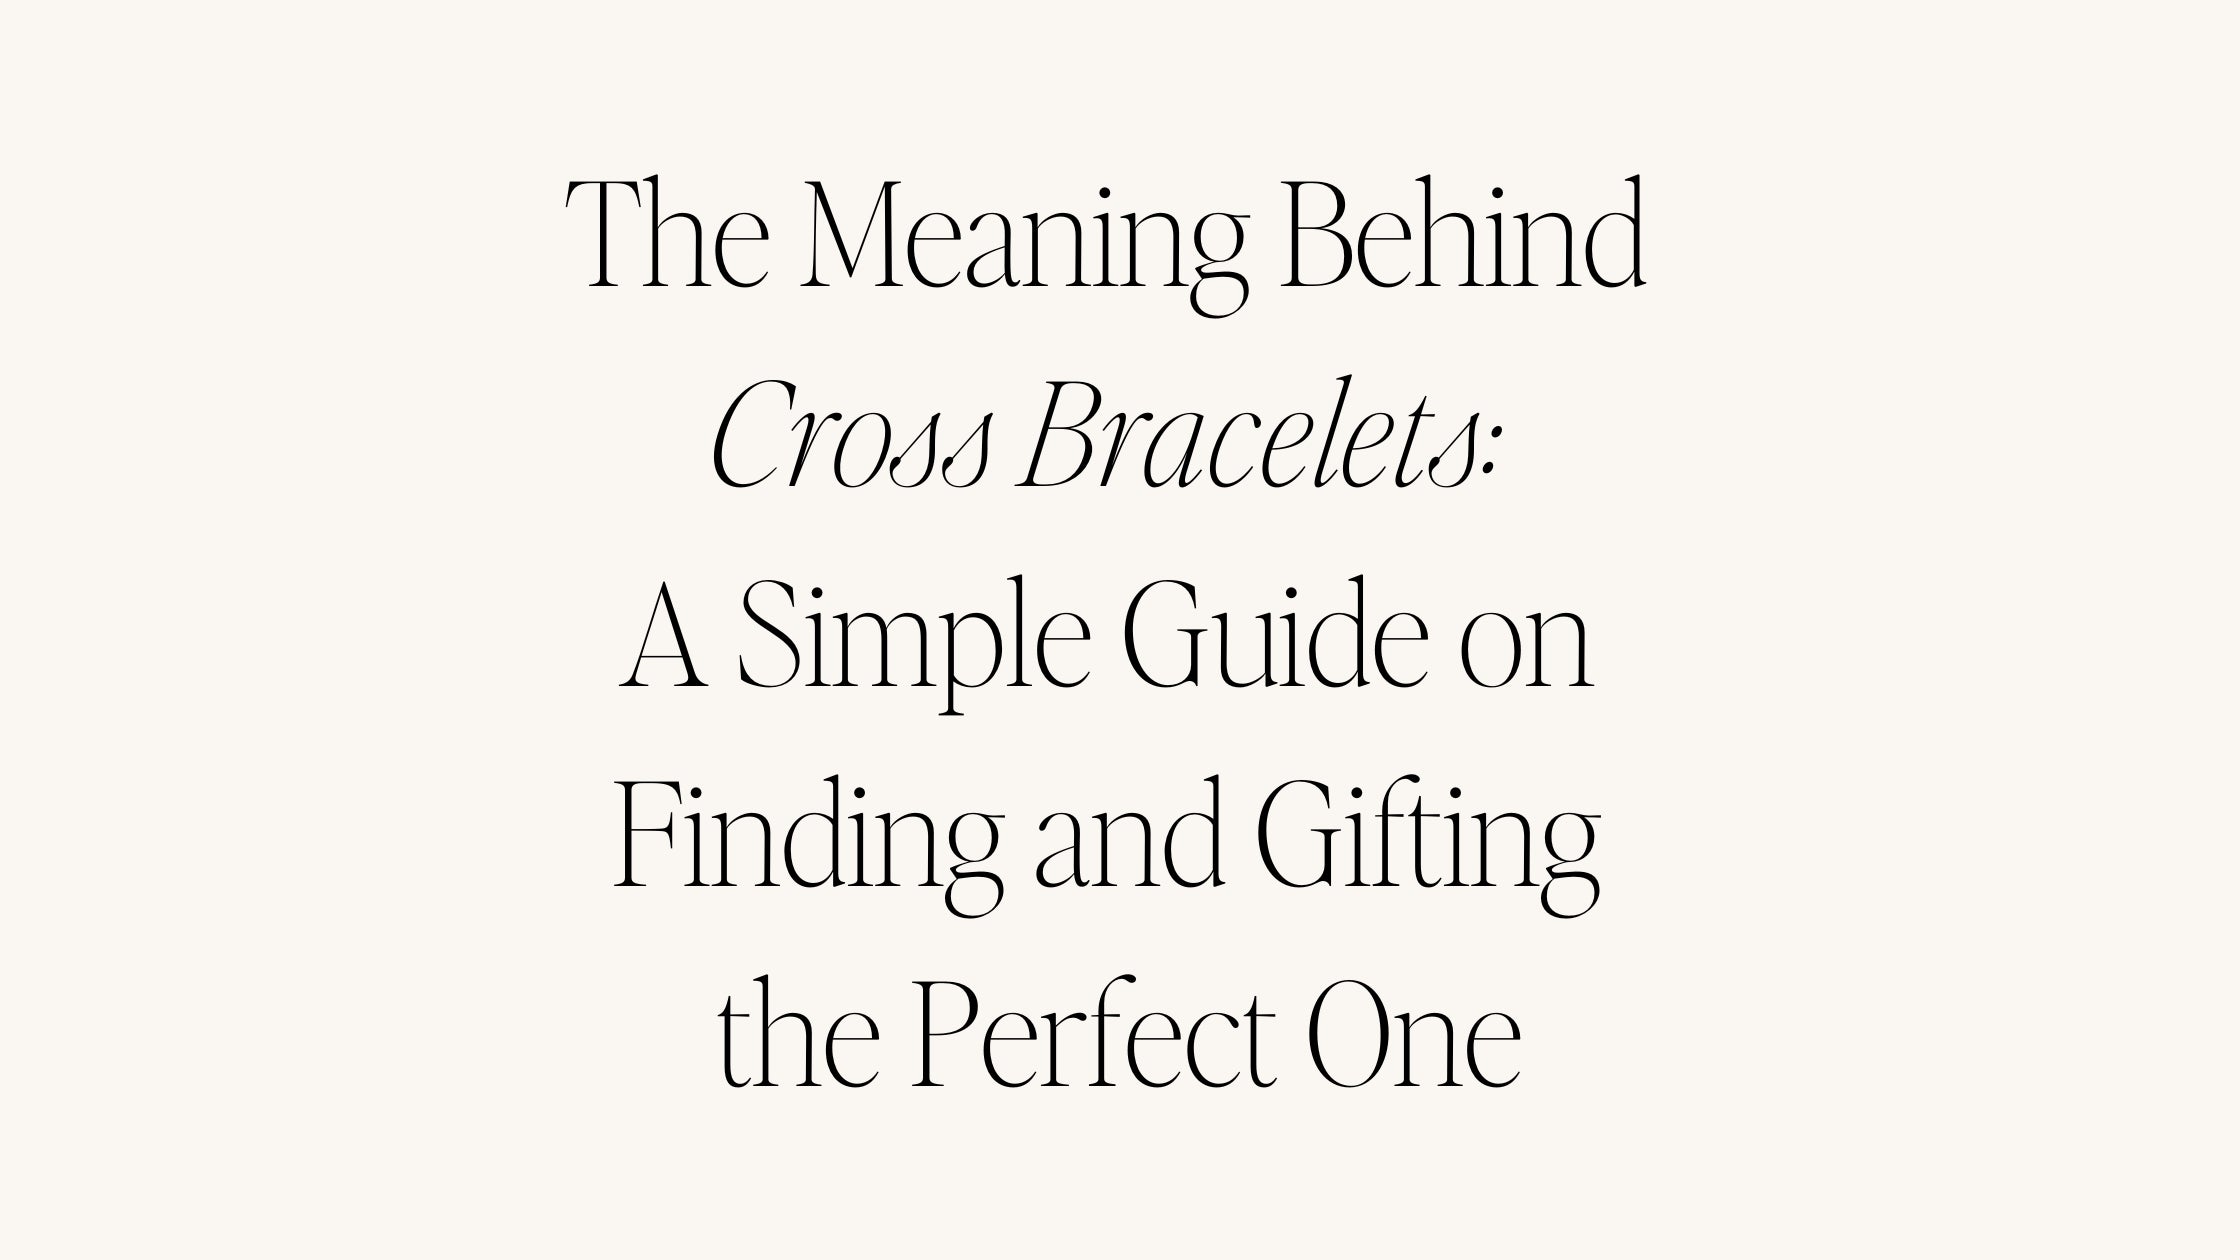 The Meaning Behind Cross Bracelets: A Simple Guide on Finding and Gifting the Perfect One